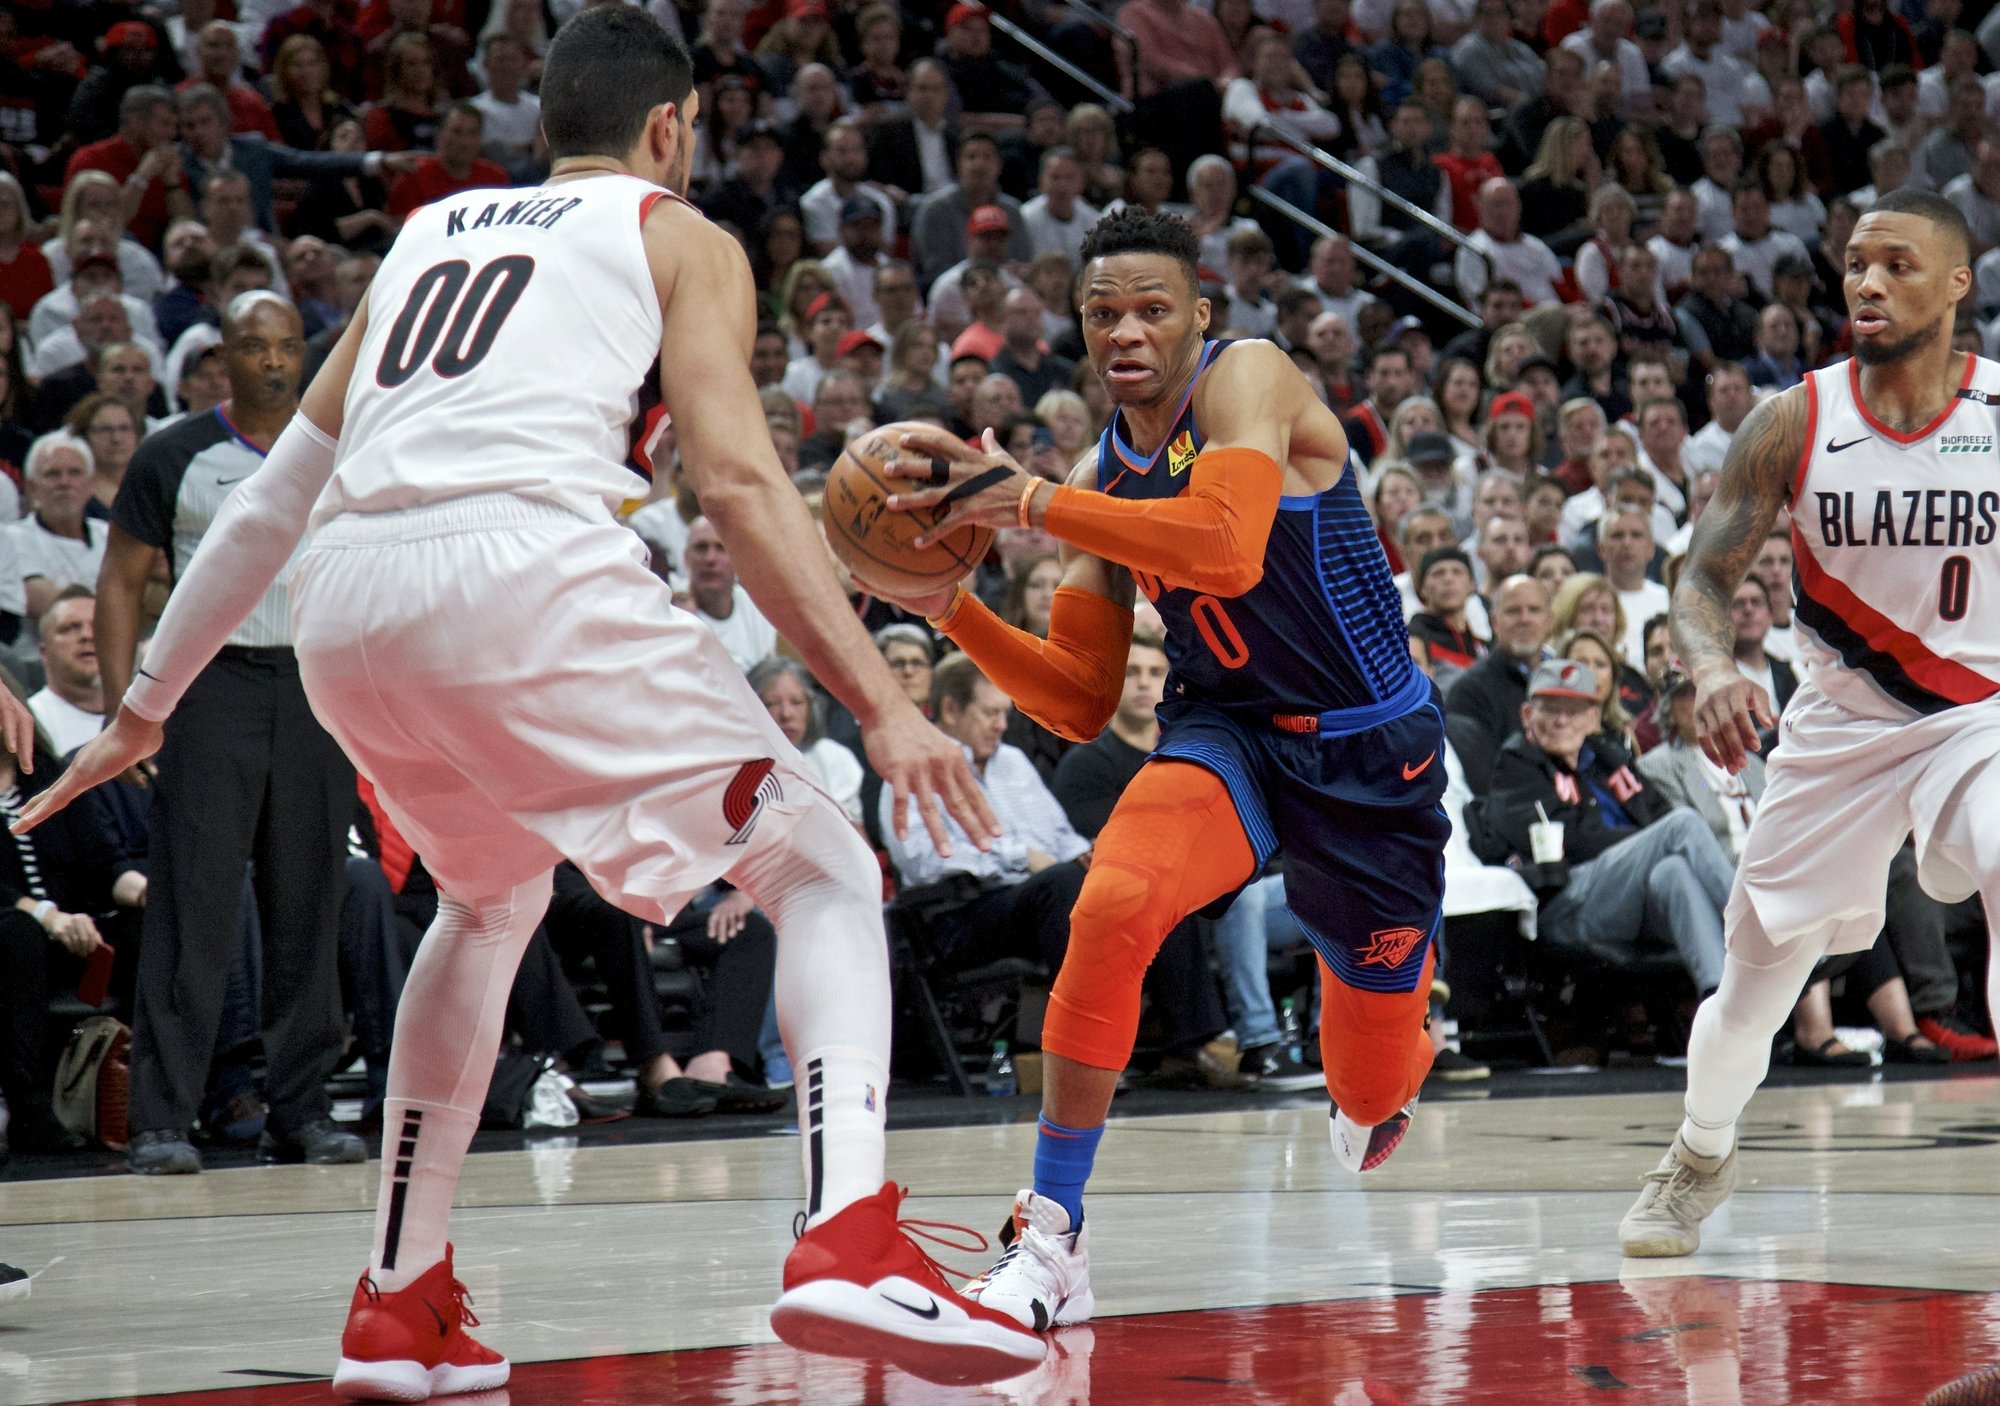 Westbrook remains defiant as ever